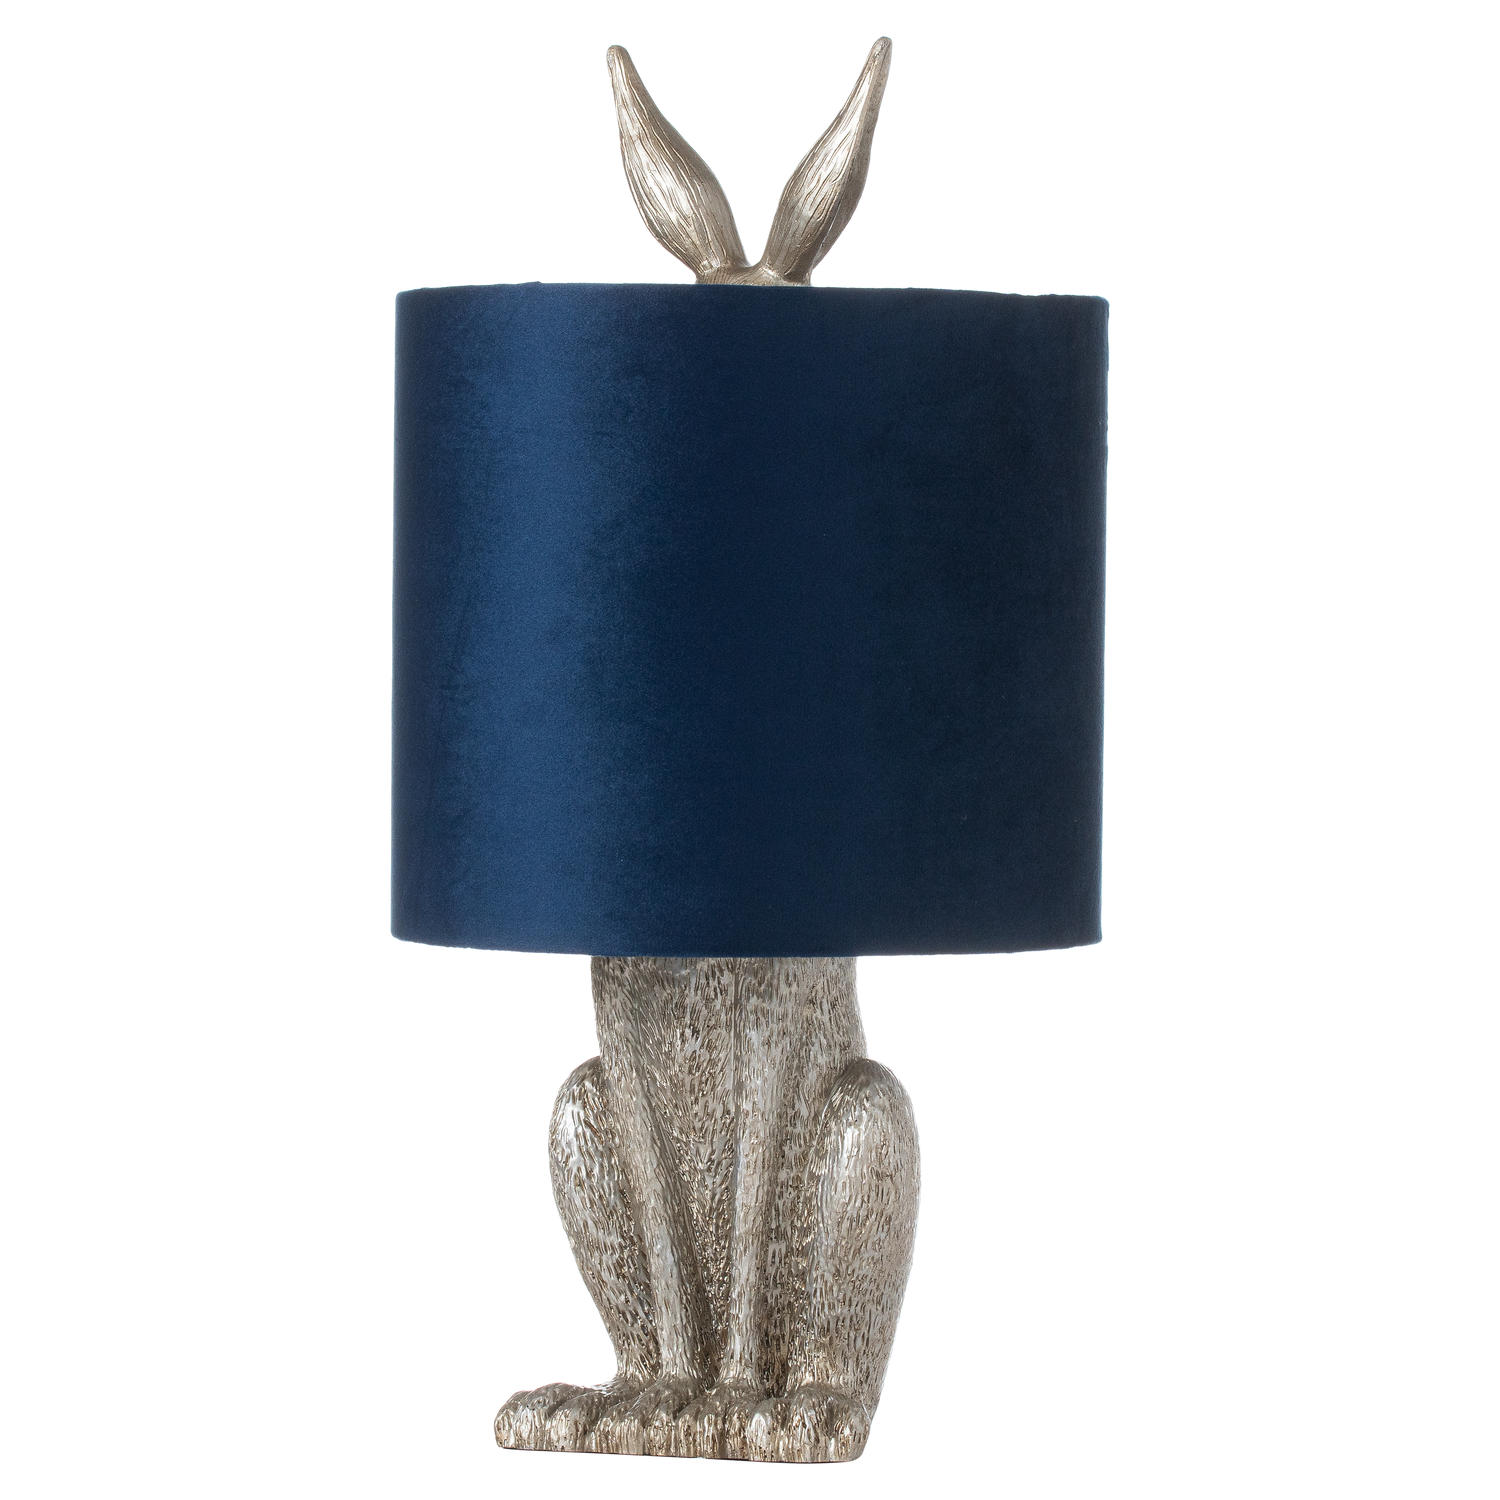 Silver Hare Table Lamp With Navy Shade - Image 1